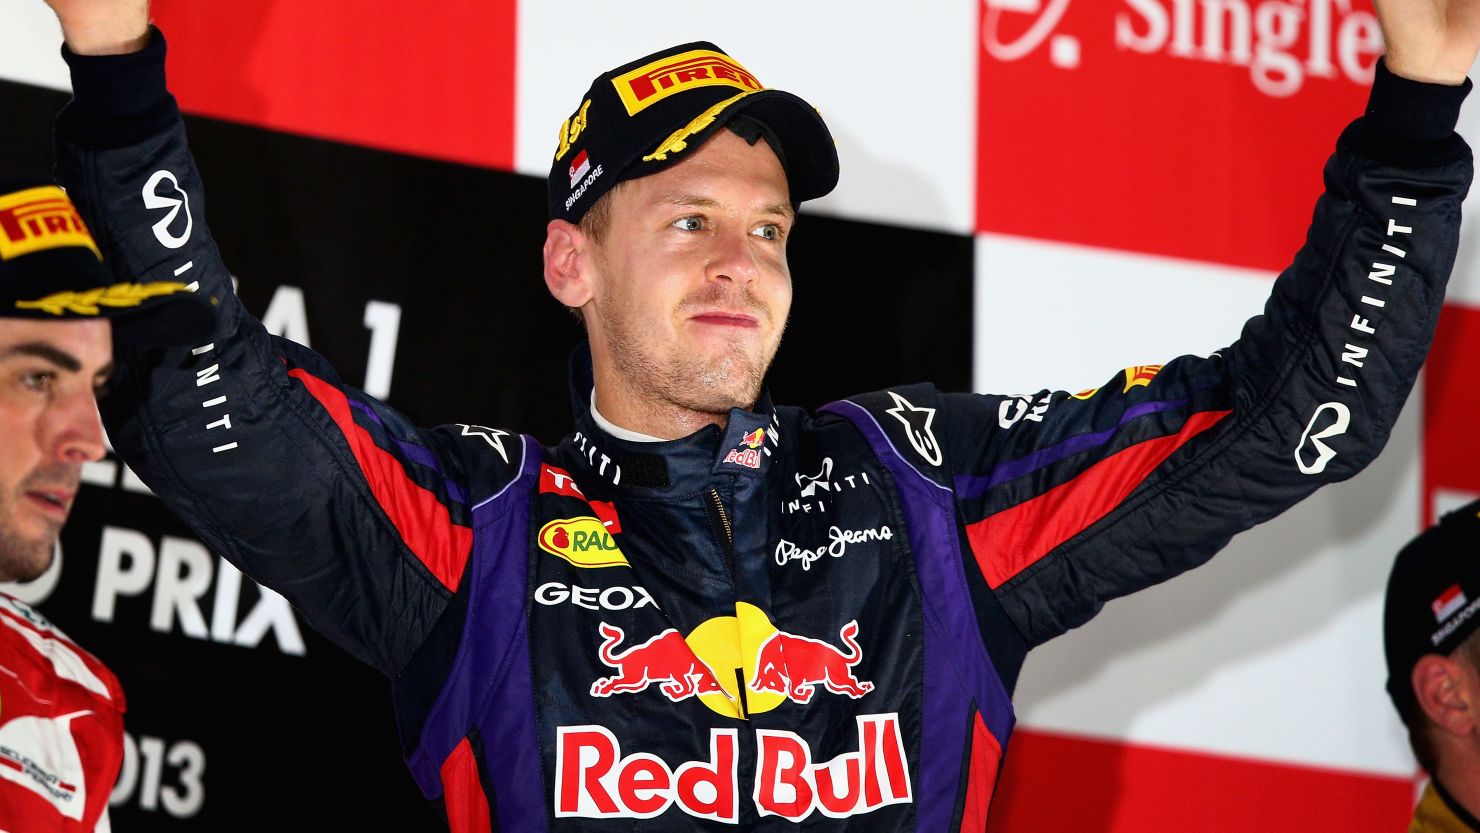 Sebastian Vettel is looking to steer his Red Bull to a fourth consecutive grand prix win in Singapore.